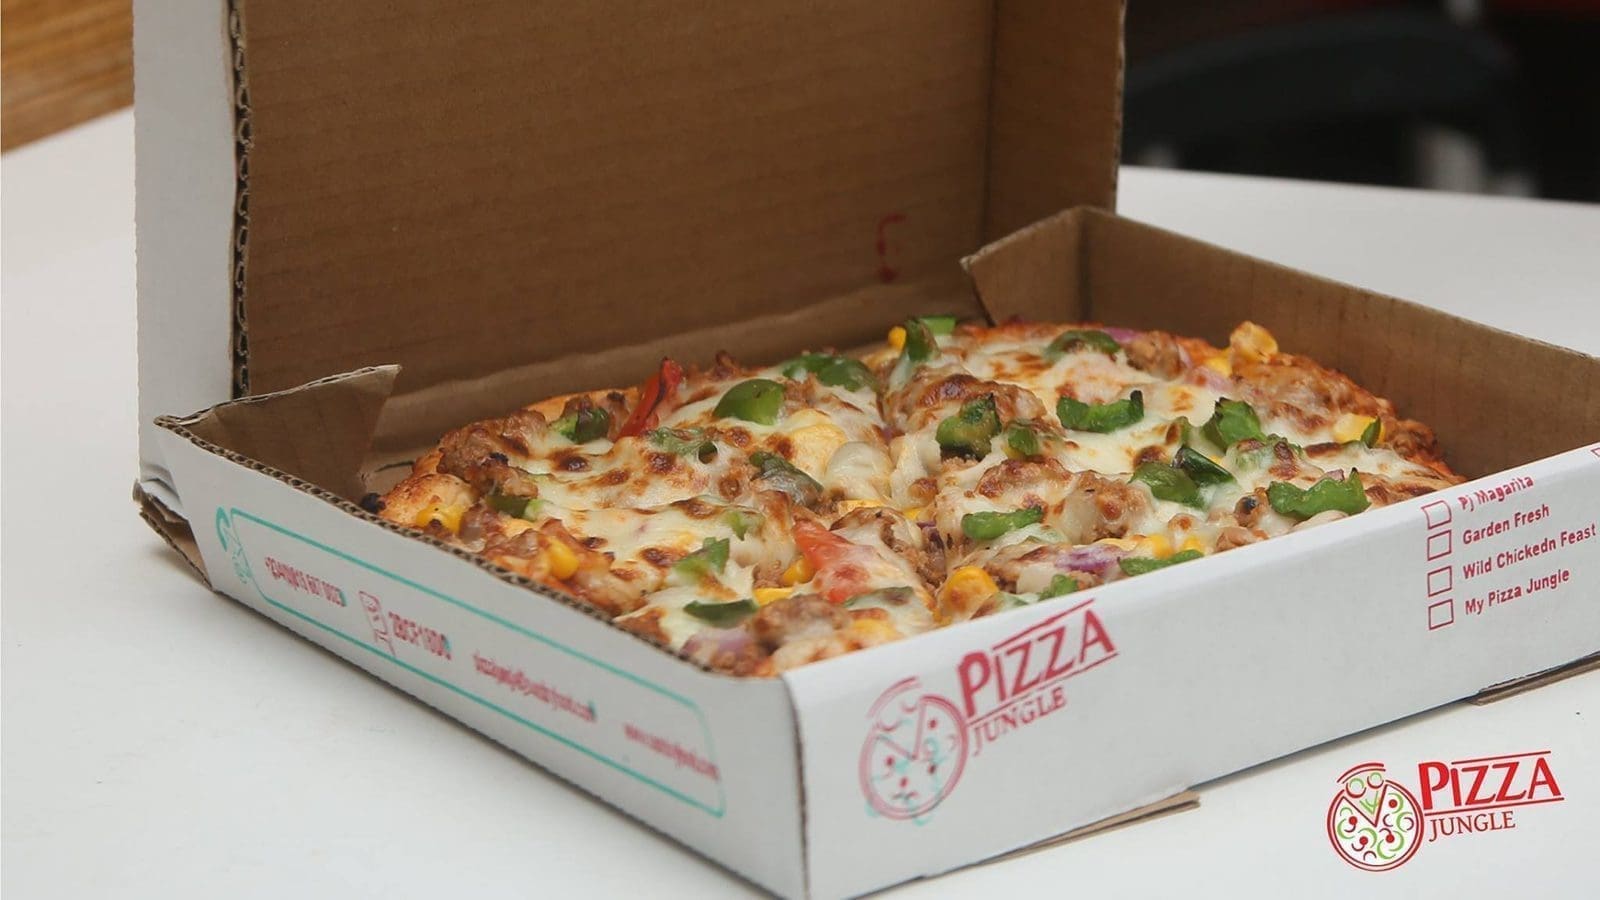 Nigeria restaurant chain owner Sundry Foods Limited expands footprint, Eat ‘N’ Go unveils Pepper Soup pizza